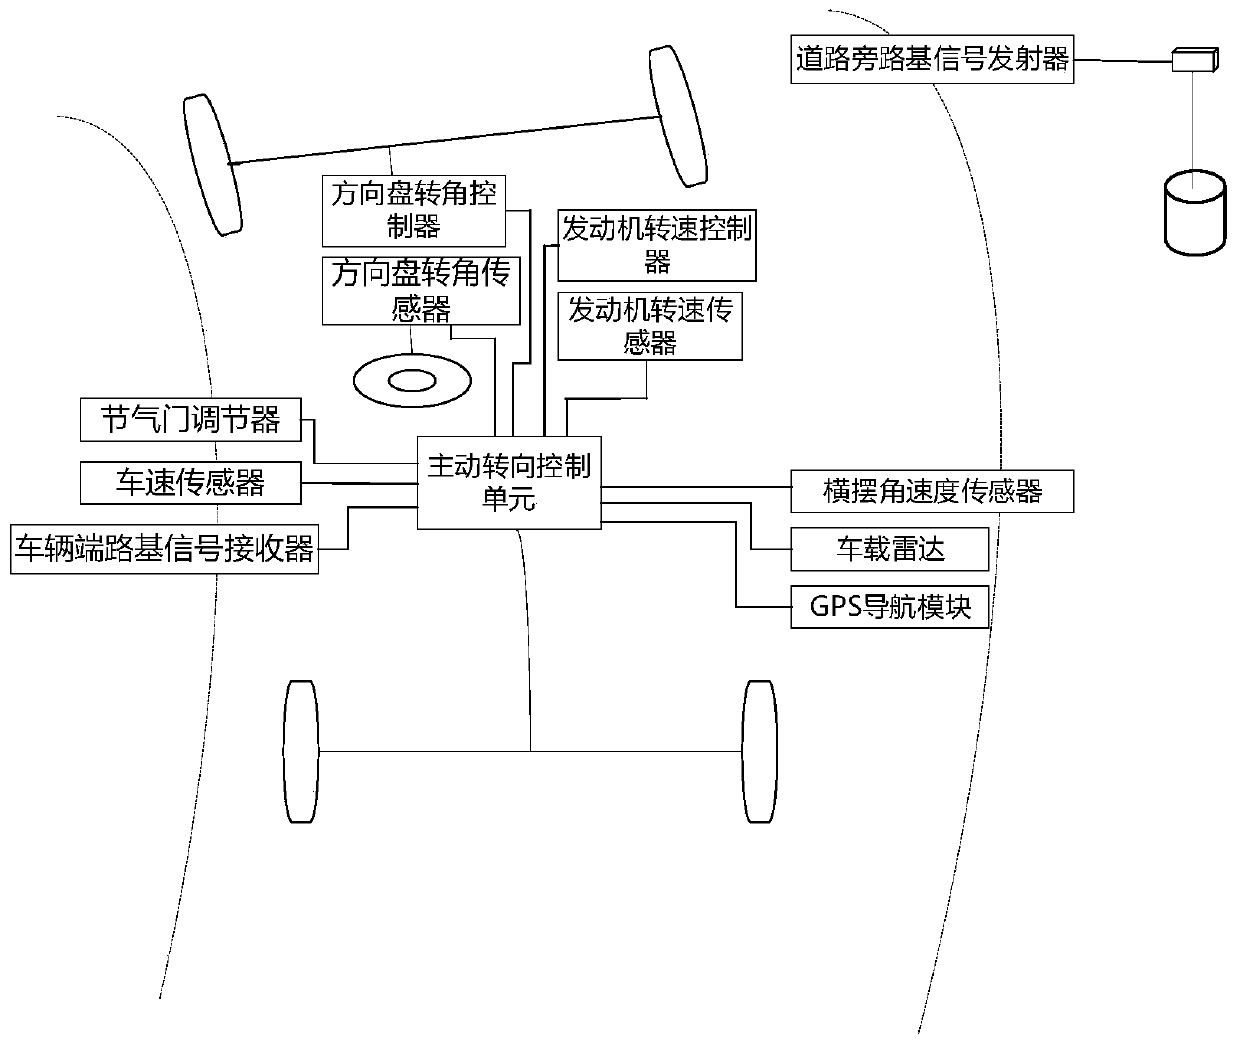 Automobile active steering control system and method based on vehicle-road collaboration